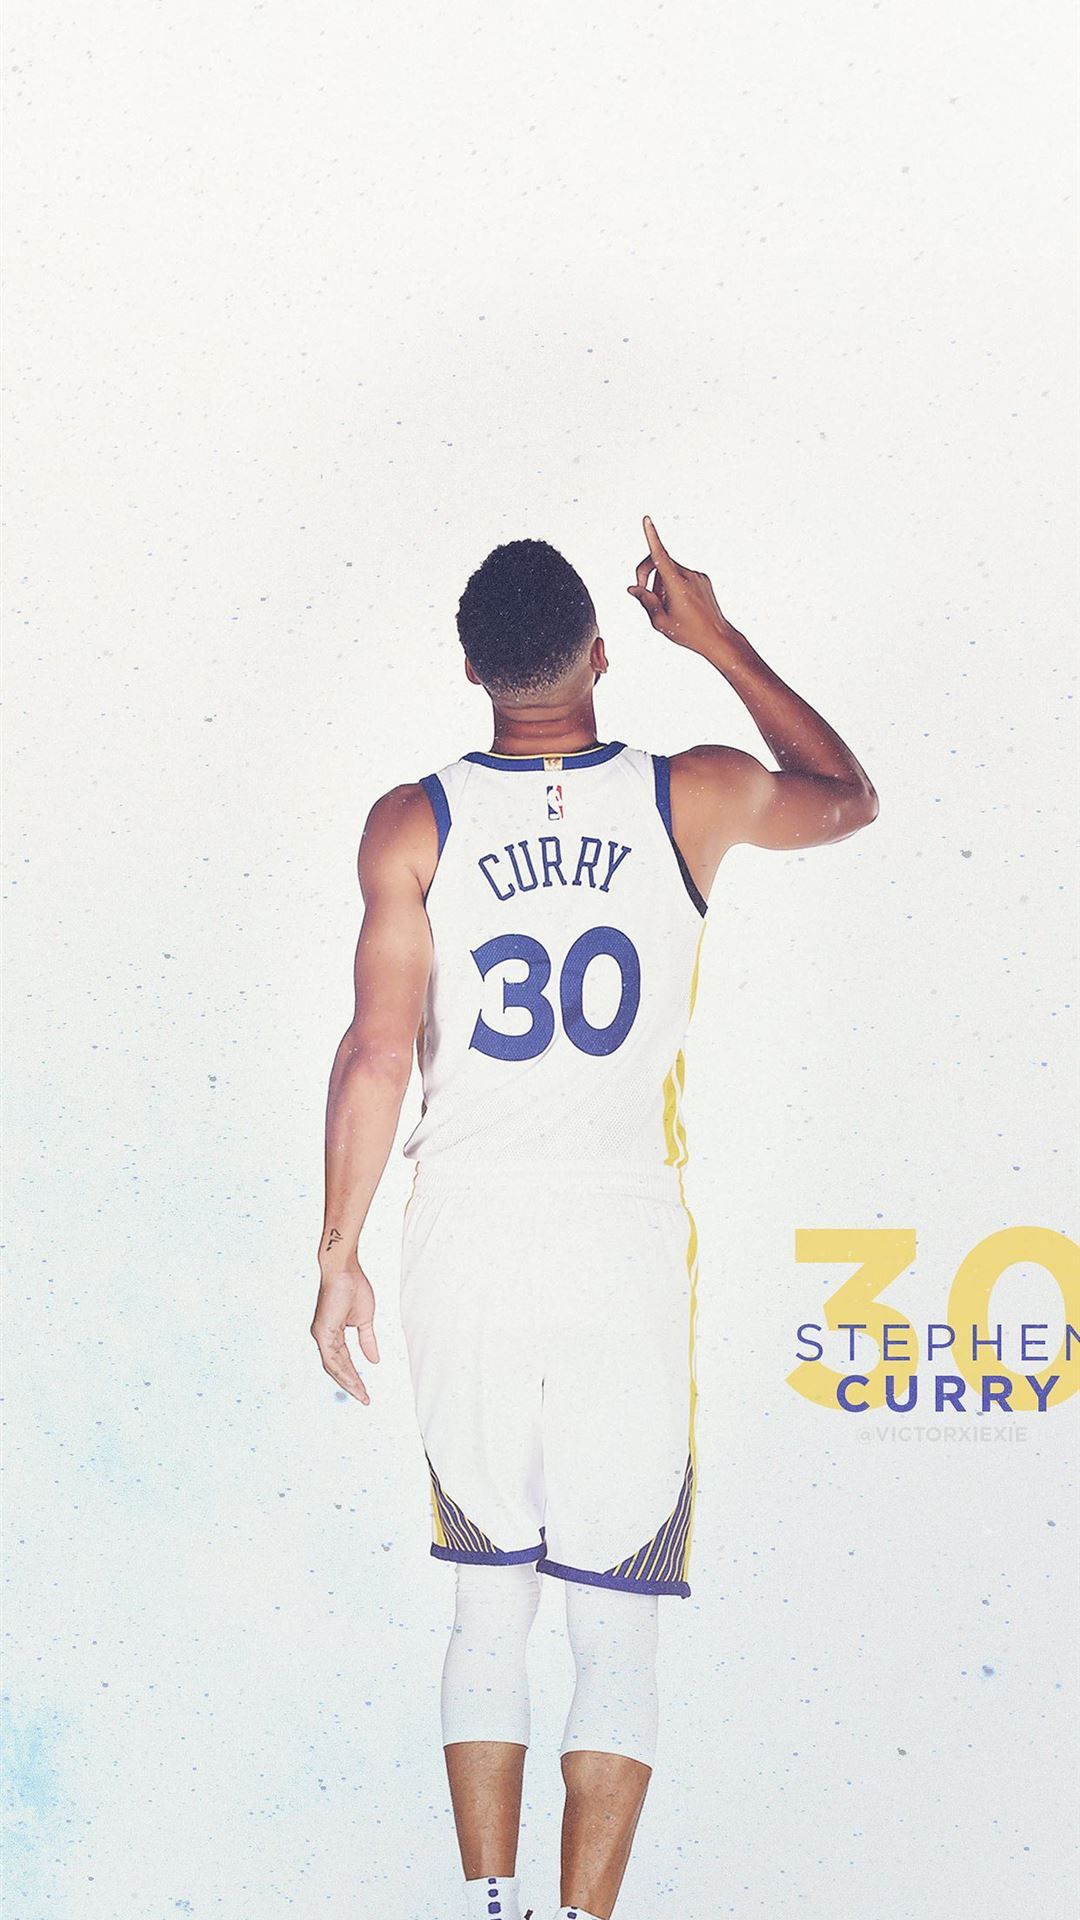 Stephen Curry Steph Curry Nba Stephen iPhone 8 Wallpaper Free Download